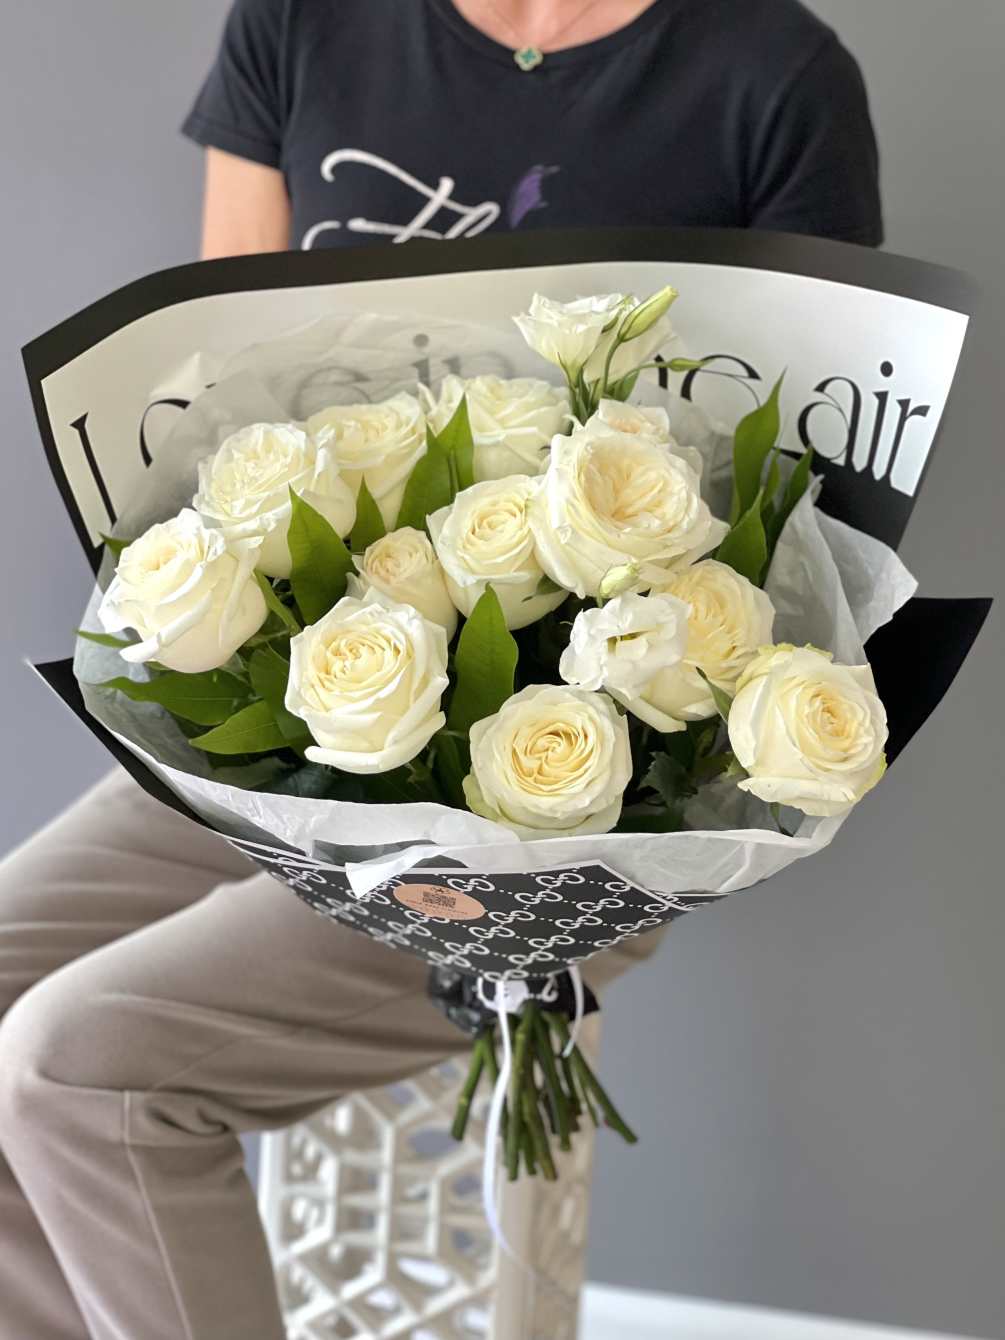 The &quot;Candlelit Elegance Bouquet&quot; is a stunning hand-tied arrangement featuring delicate white